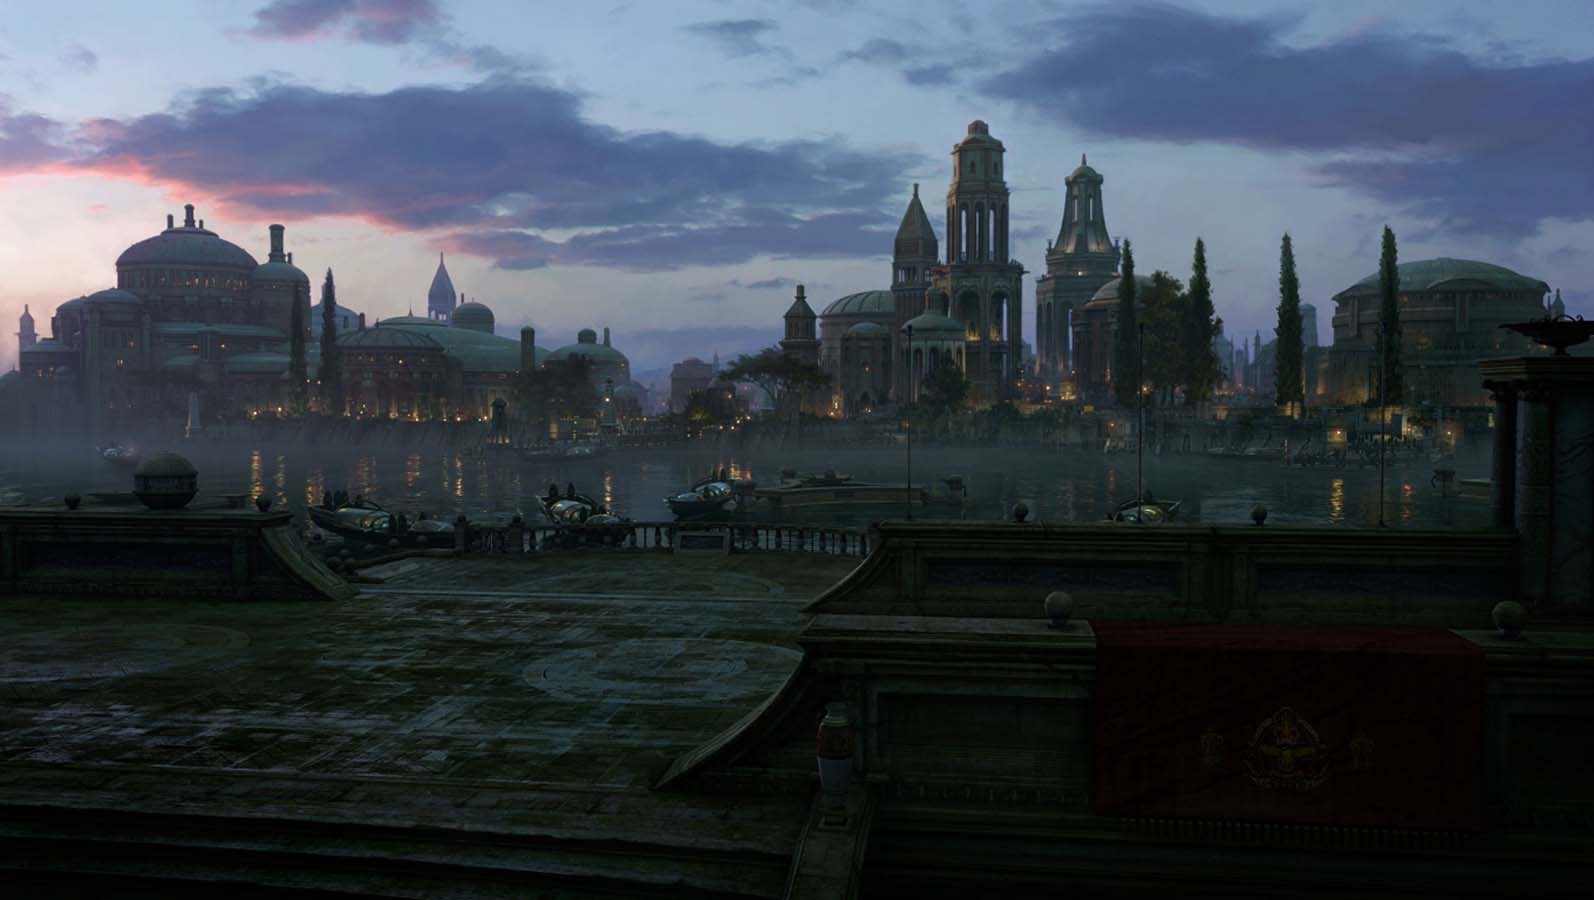 General 1594x900 Star Wars Naboo movies CGI cityscape science fiction